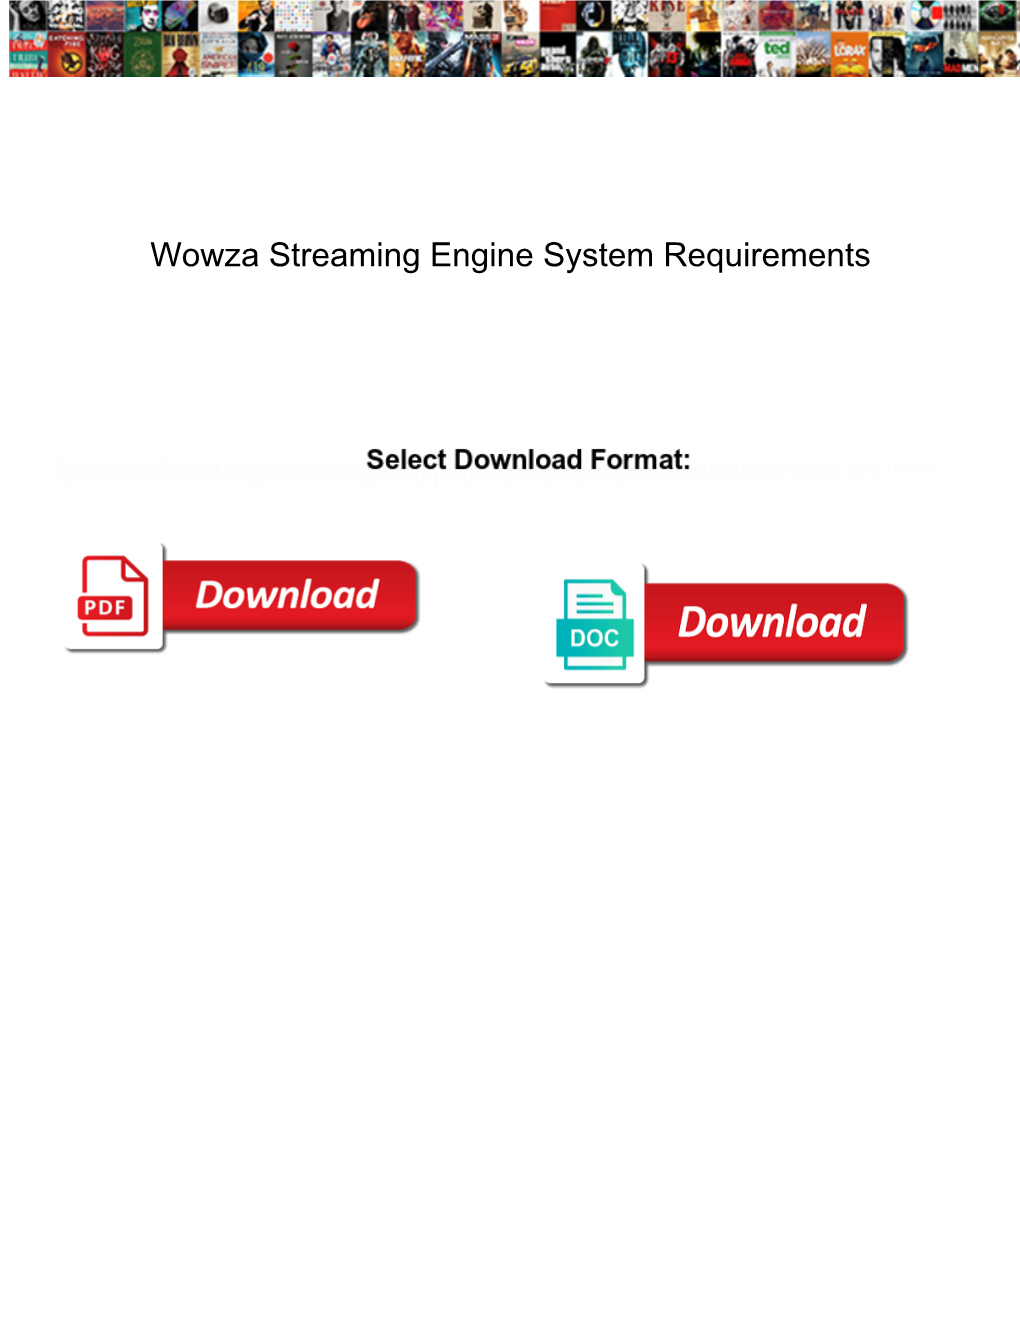 Wowza Streaming Engine System Requirements